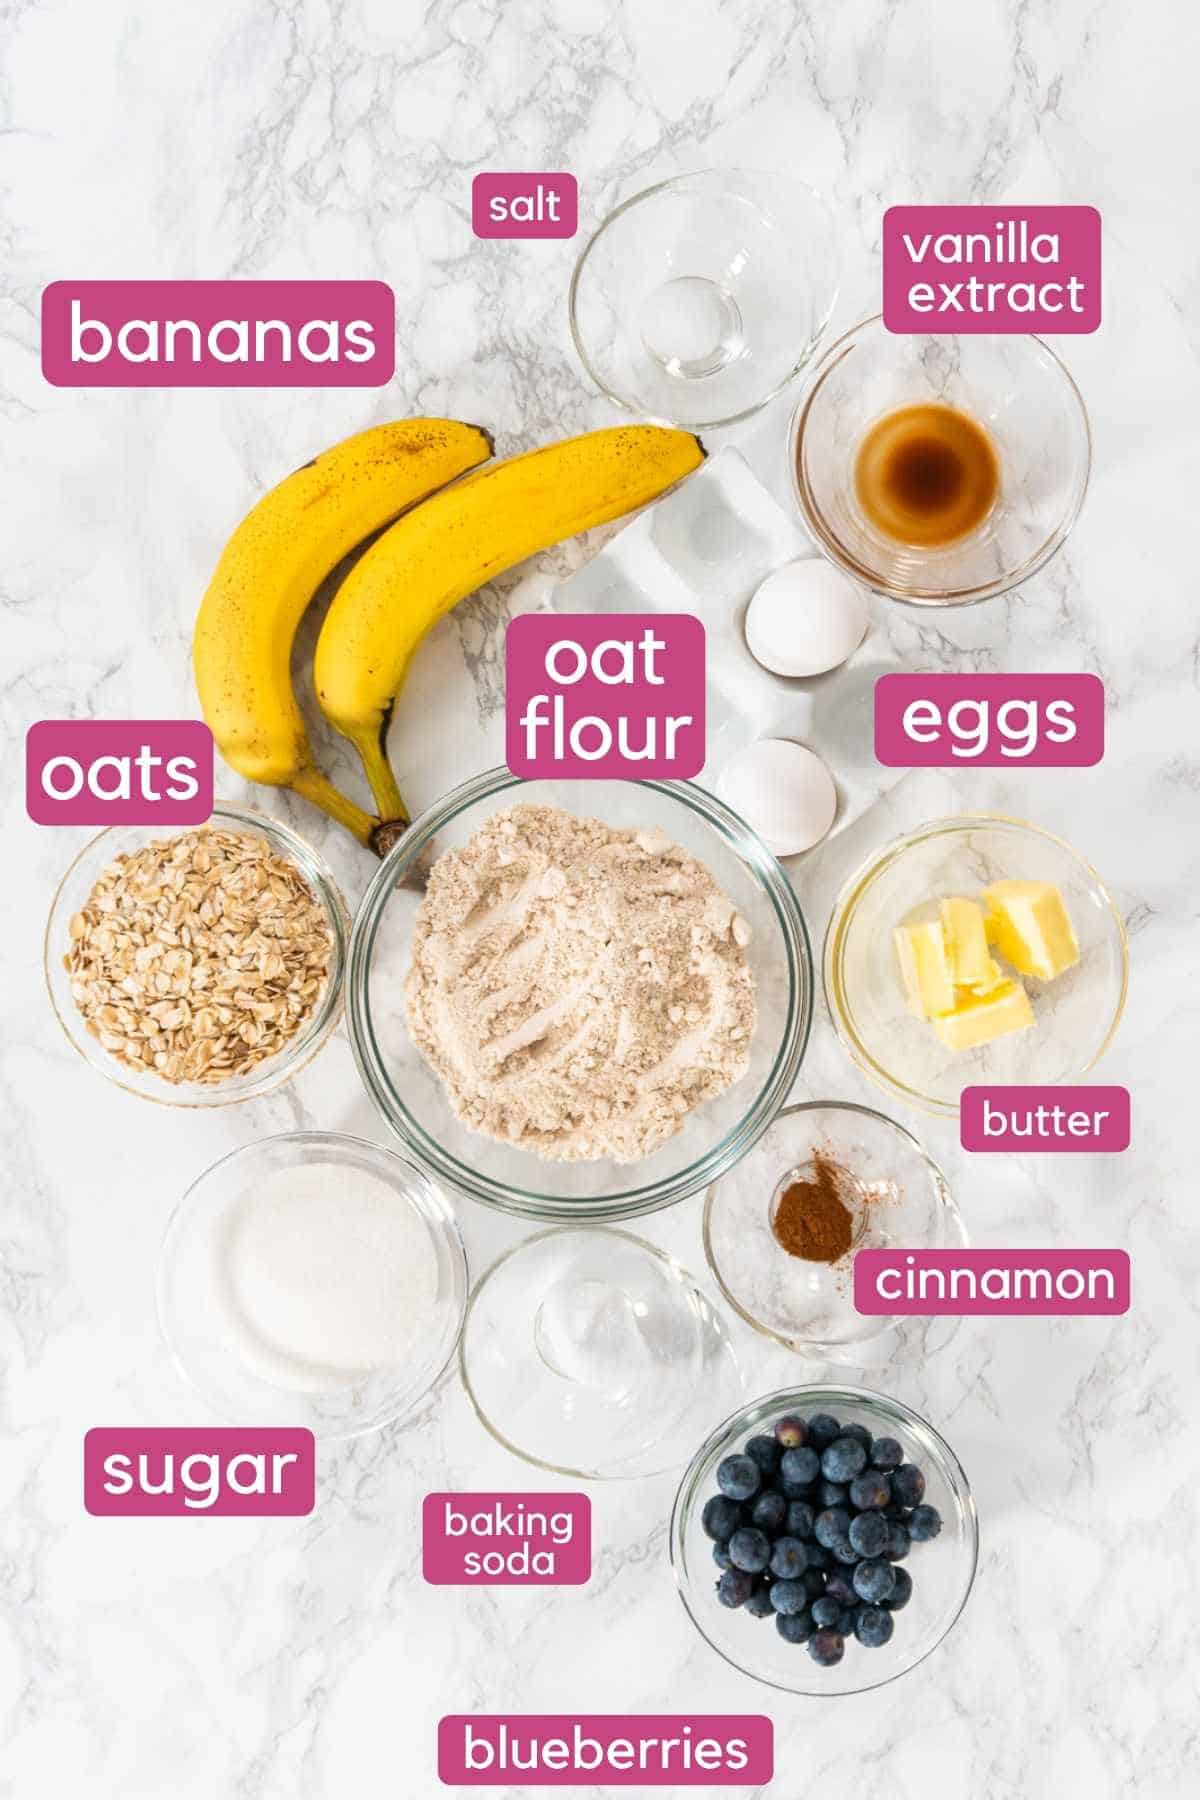 Ingredients for blueberry banana oatmeal muffins.